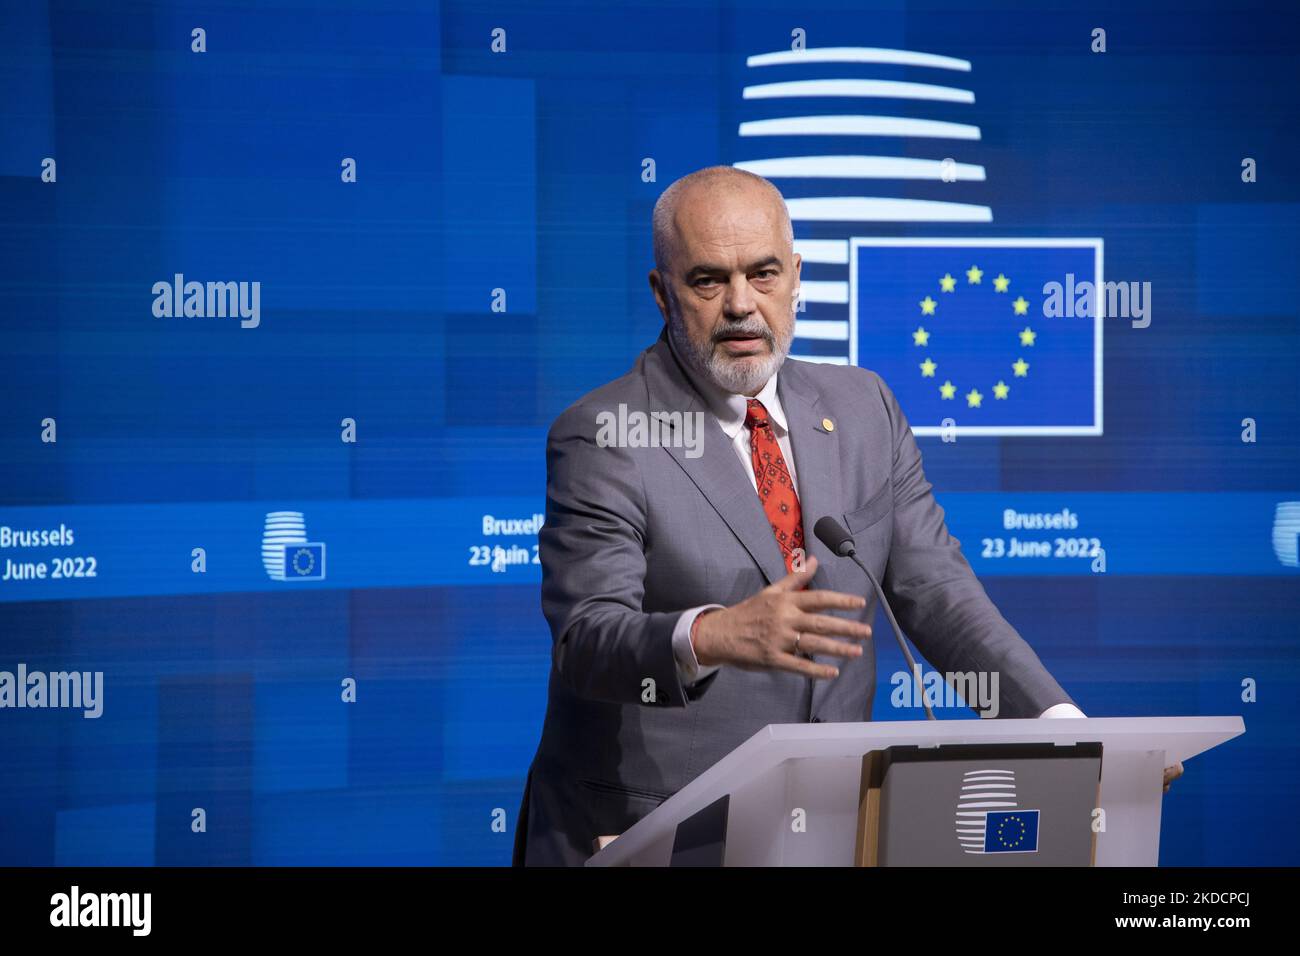 Edi Rama Prime Minister of Albania as seen talking to the media and journalists at a press conference after the EU - Western Balkan summit with the main topic the enlargement of European Union on the Western Balkans. The EU expansion negotiations failed for the six Balkan countries of Albania, Bosnia, Kosovo, Montenegro, North Macedonia and Serbia but Ukraine and Moldova have both been accepted with the status of EU candidate members. EU - Western Balkan Leader's meeting on 23 June 2022, ahead of the European Council summit in Brussels, Belgium. (Photo by Nicolas Economou/NurPhoto) Stock Photo